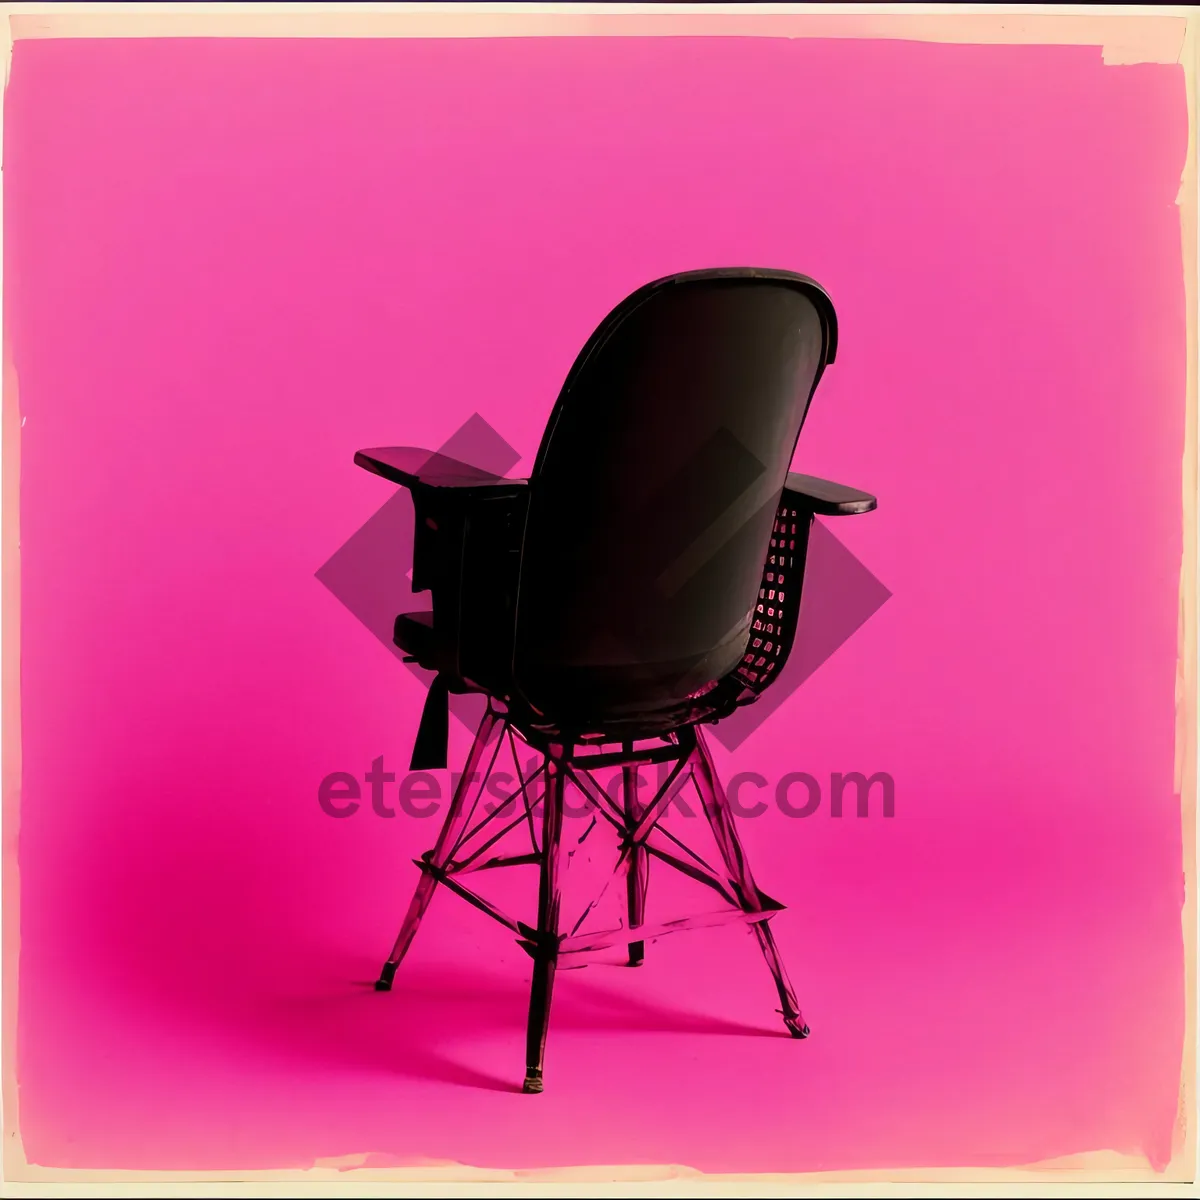 Picture of Rocking Seat: Stylish Folding Chair for Comfortable Furnishing.